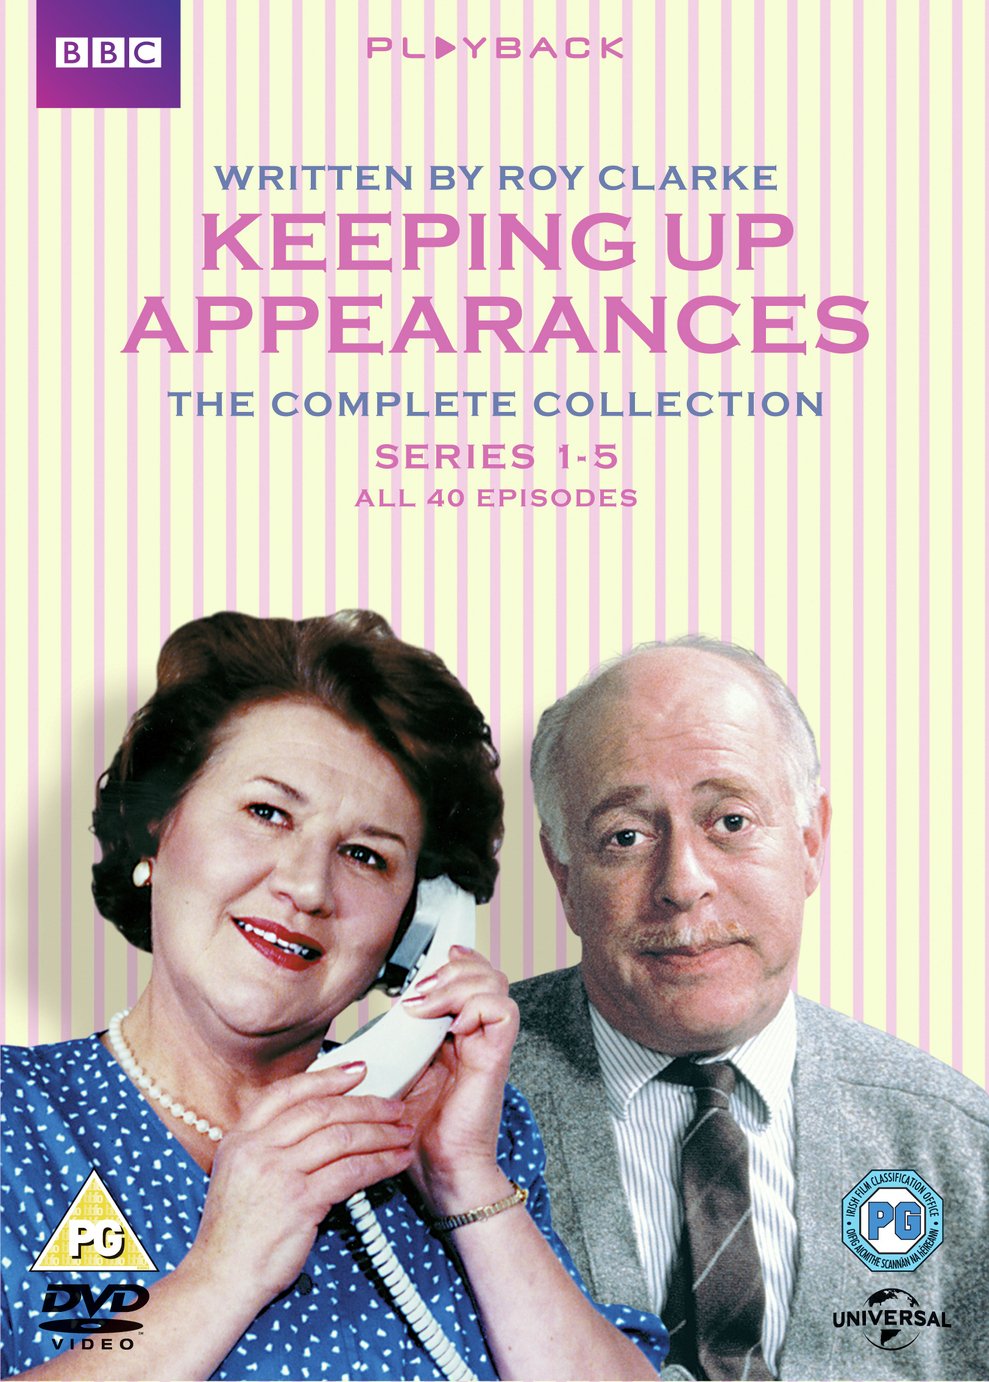 Keeping Up Appearances Collection DVD Box Set Review